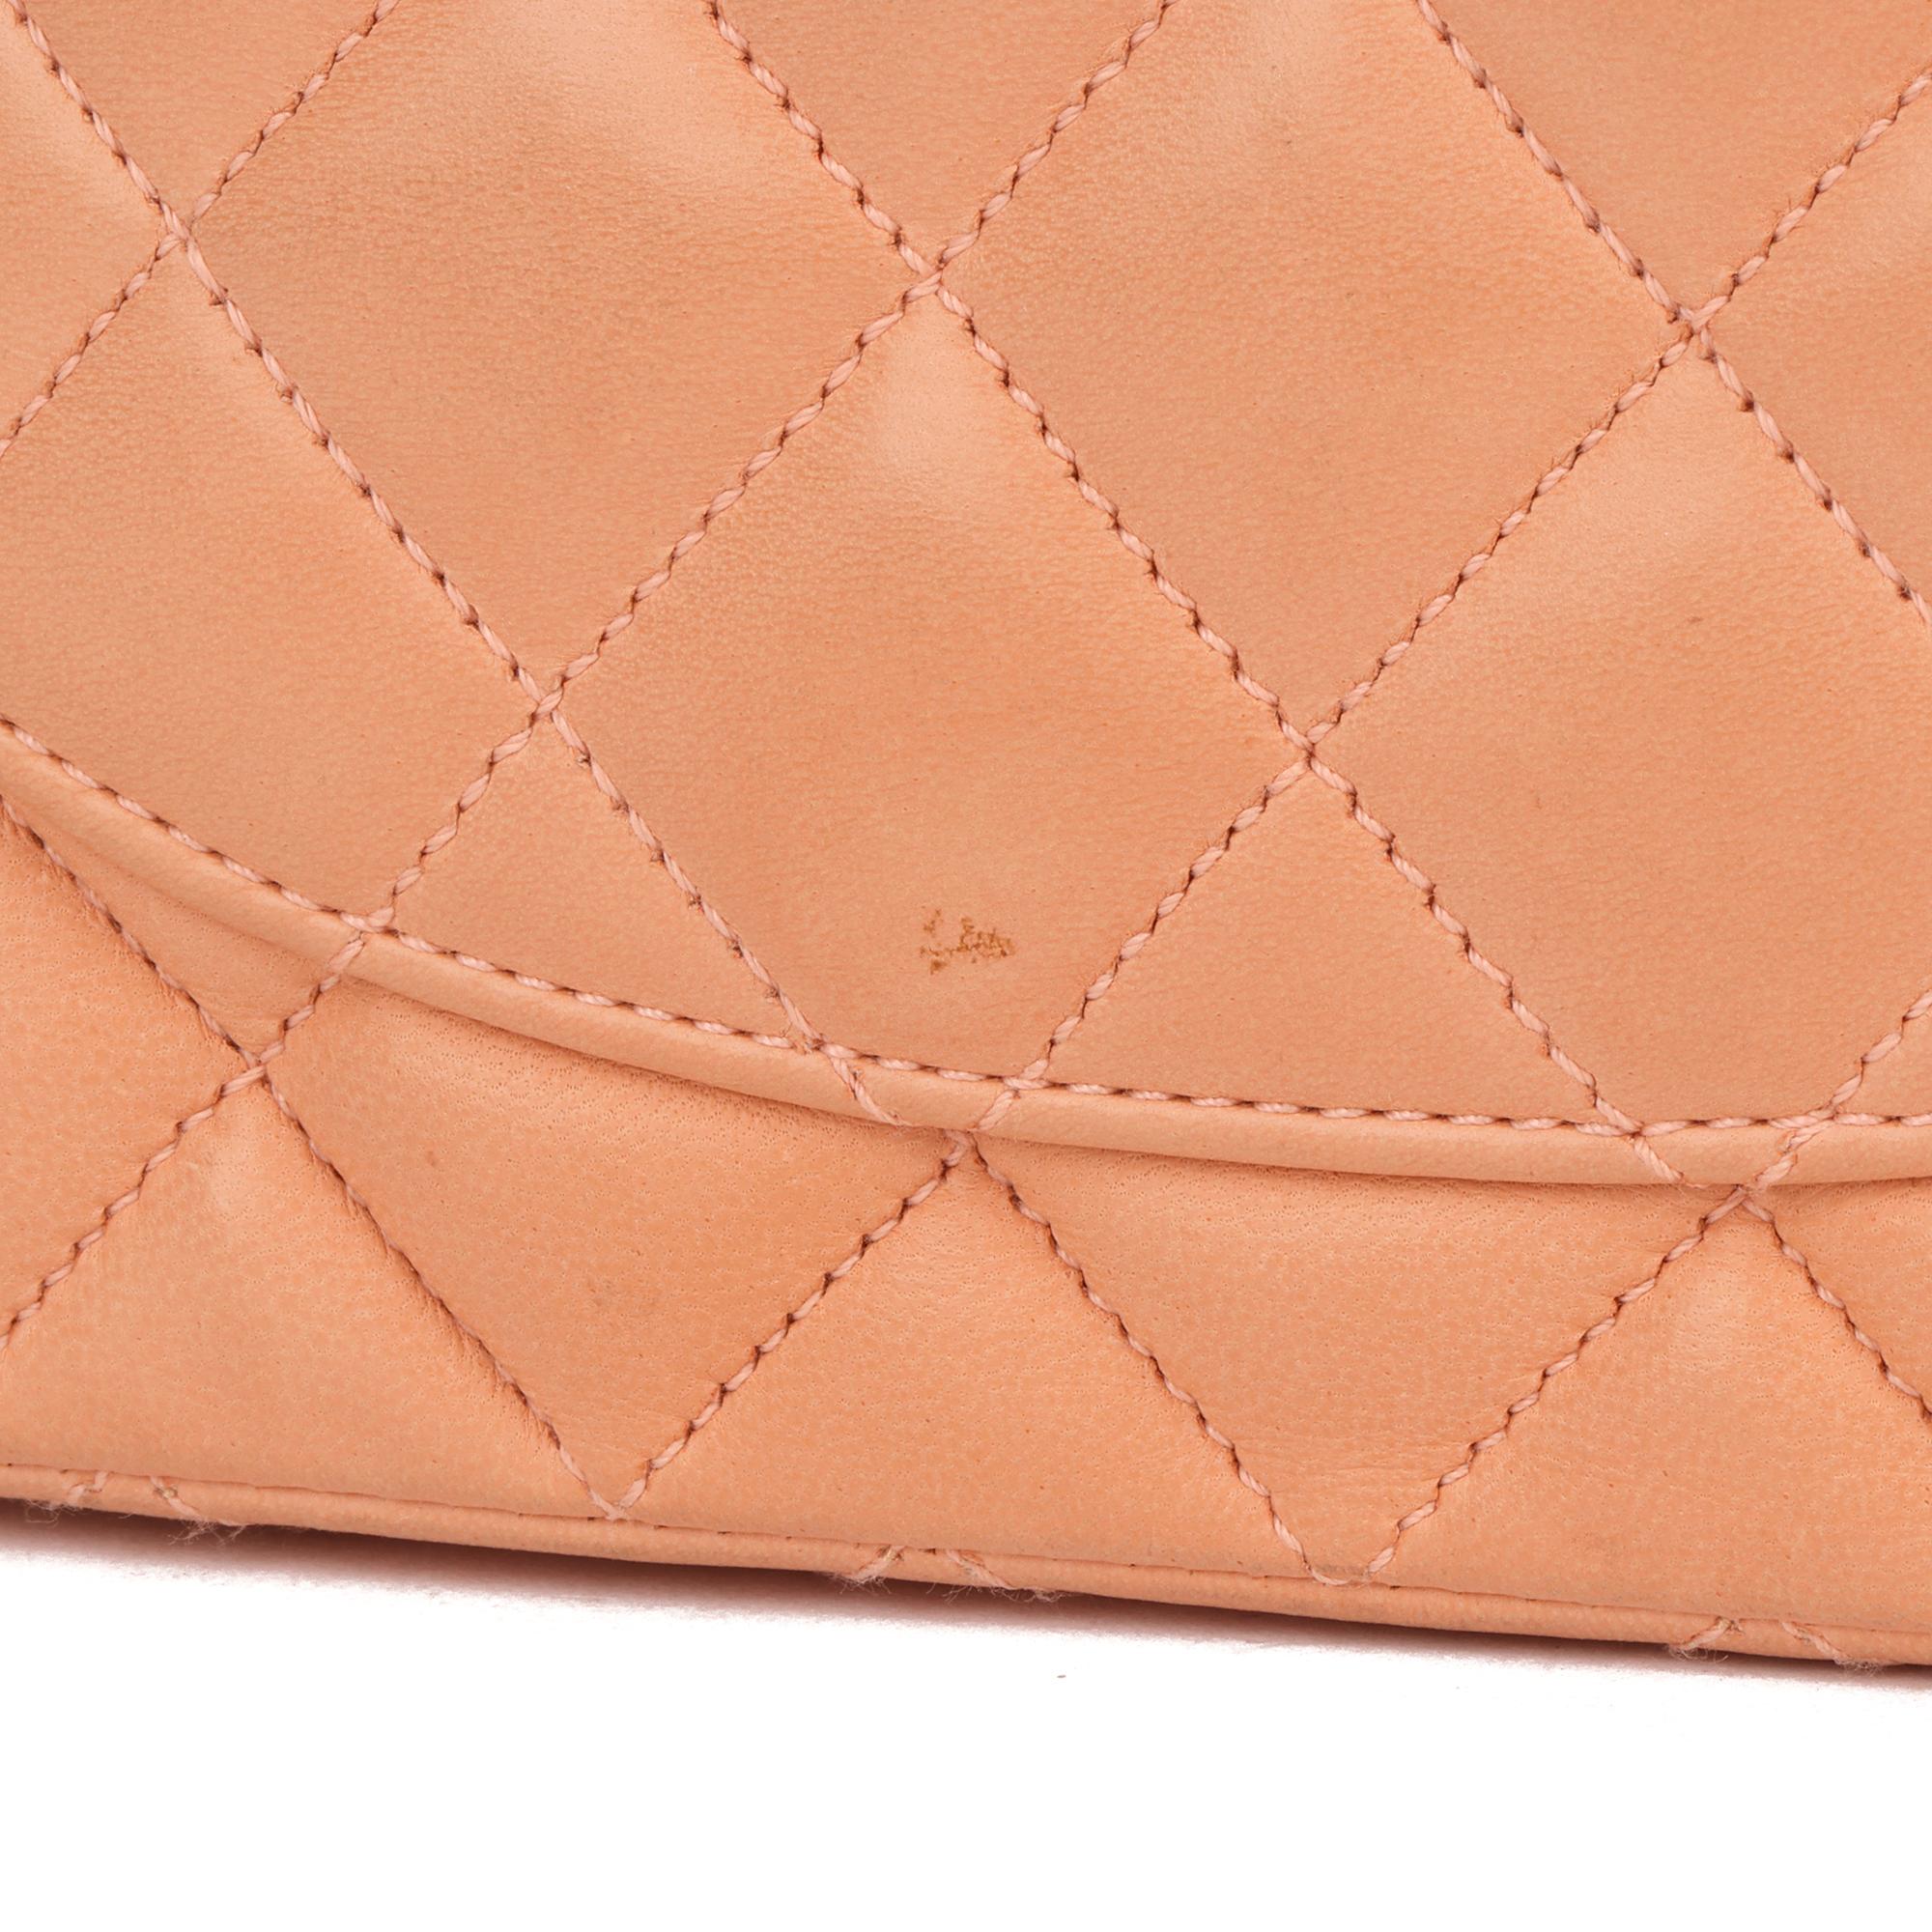 2005 Chanel Peach Quilted Lambskin Leather Vintage Mini Flap Bag  4